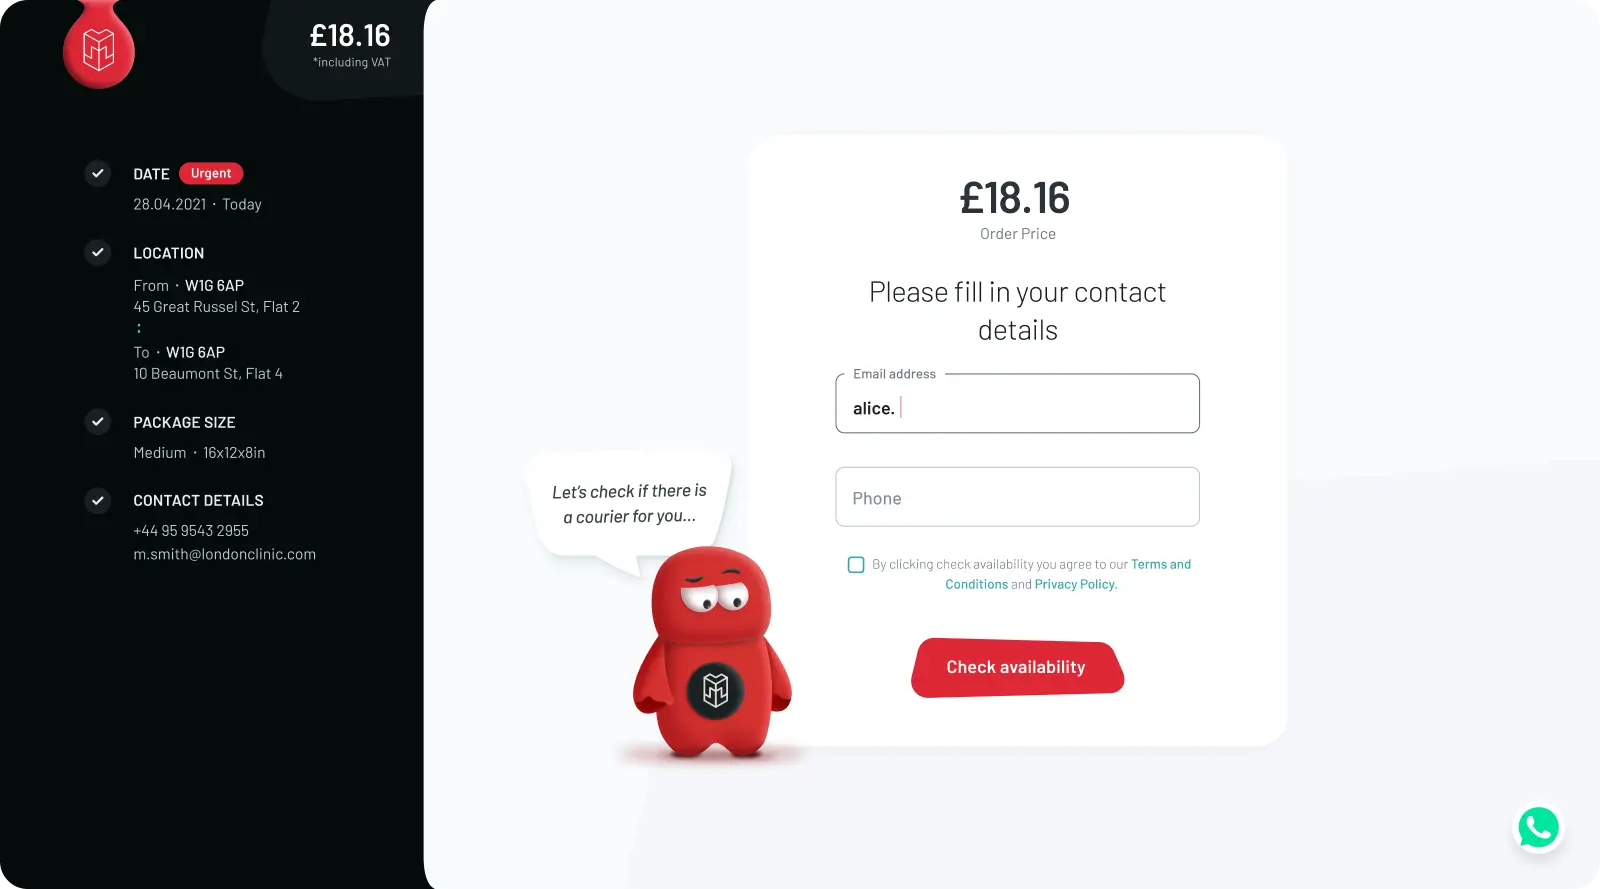 Design of an ordering system with a contact form and courier availability check. On the left, a red brand hero with a speech bubble saying: "Let's check if there is a courier for you"